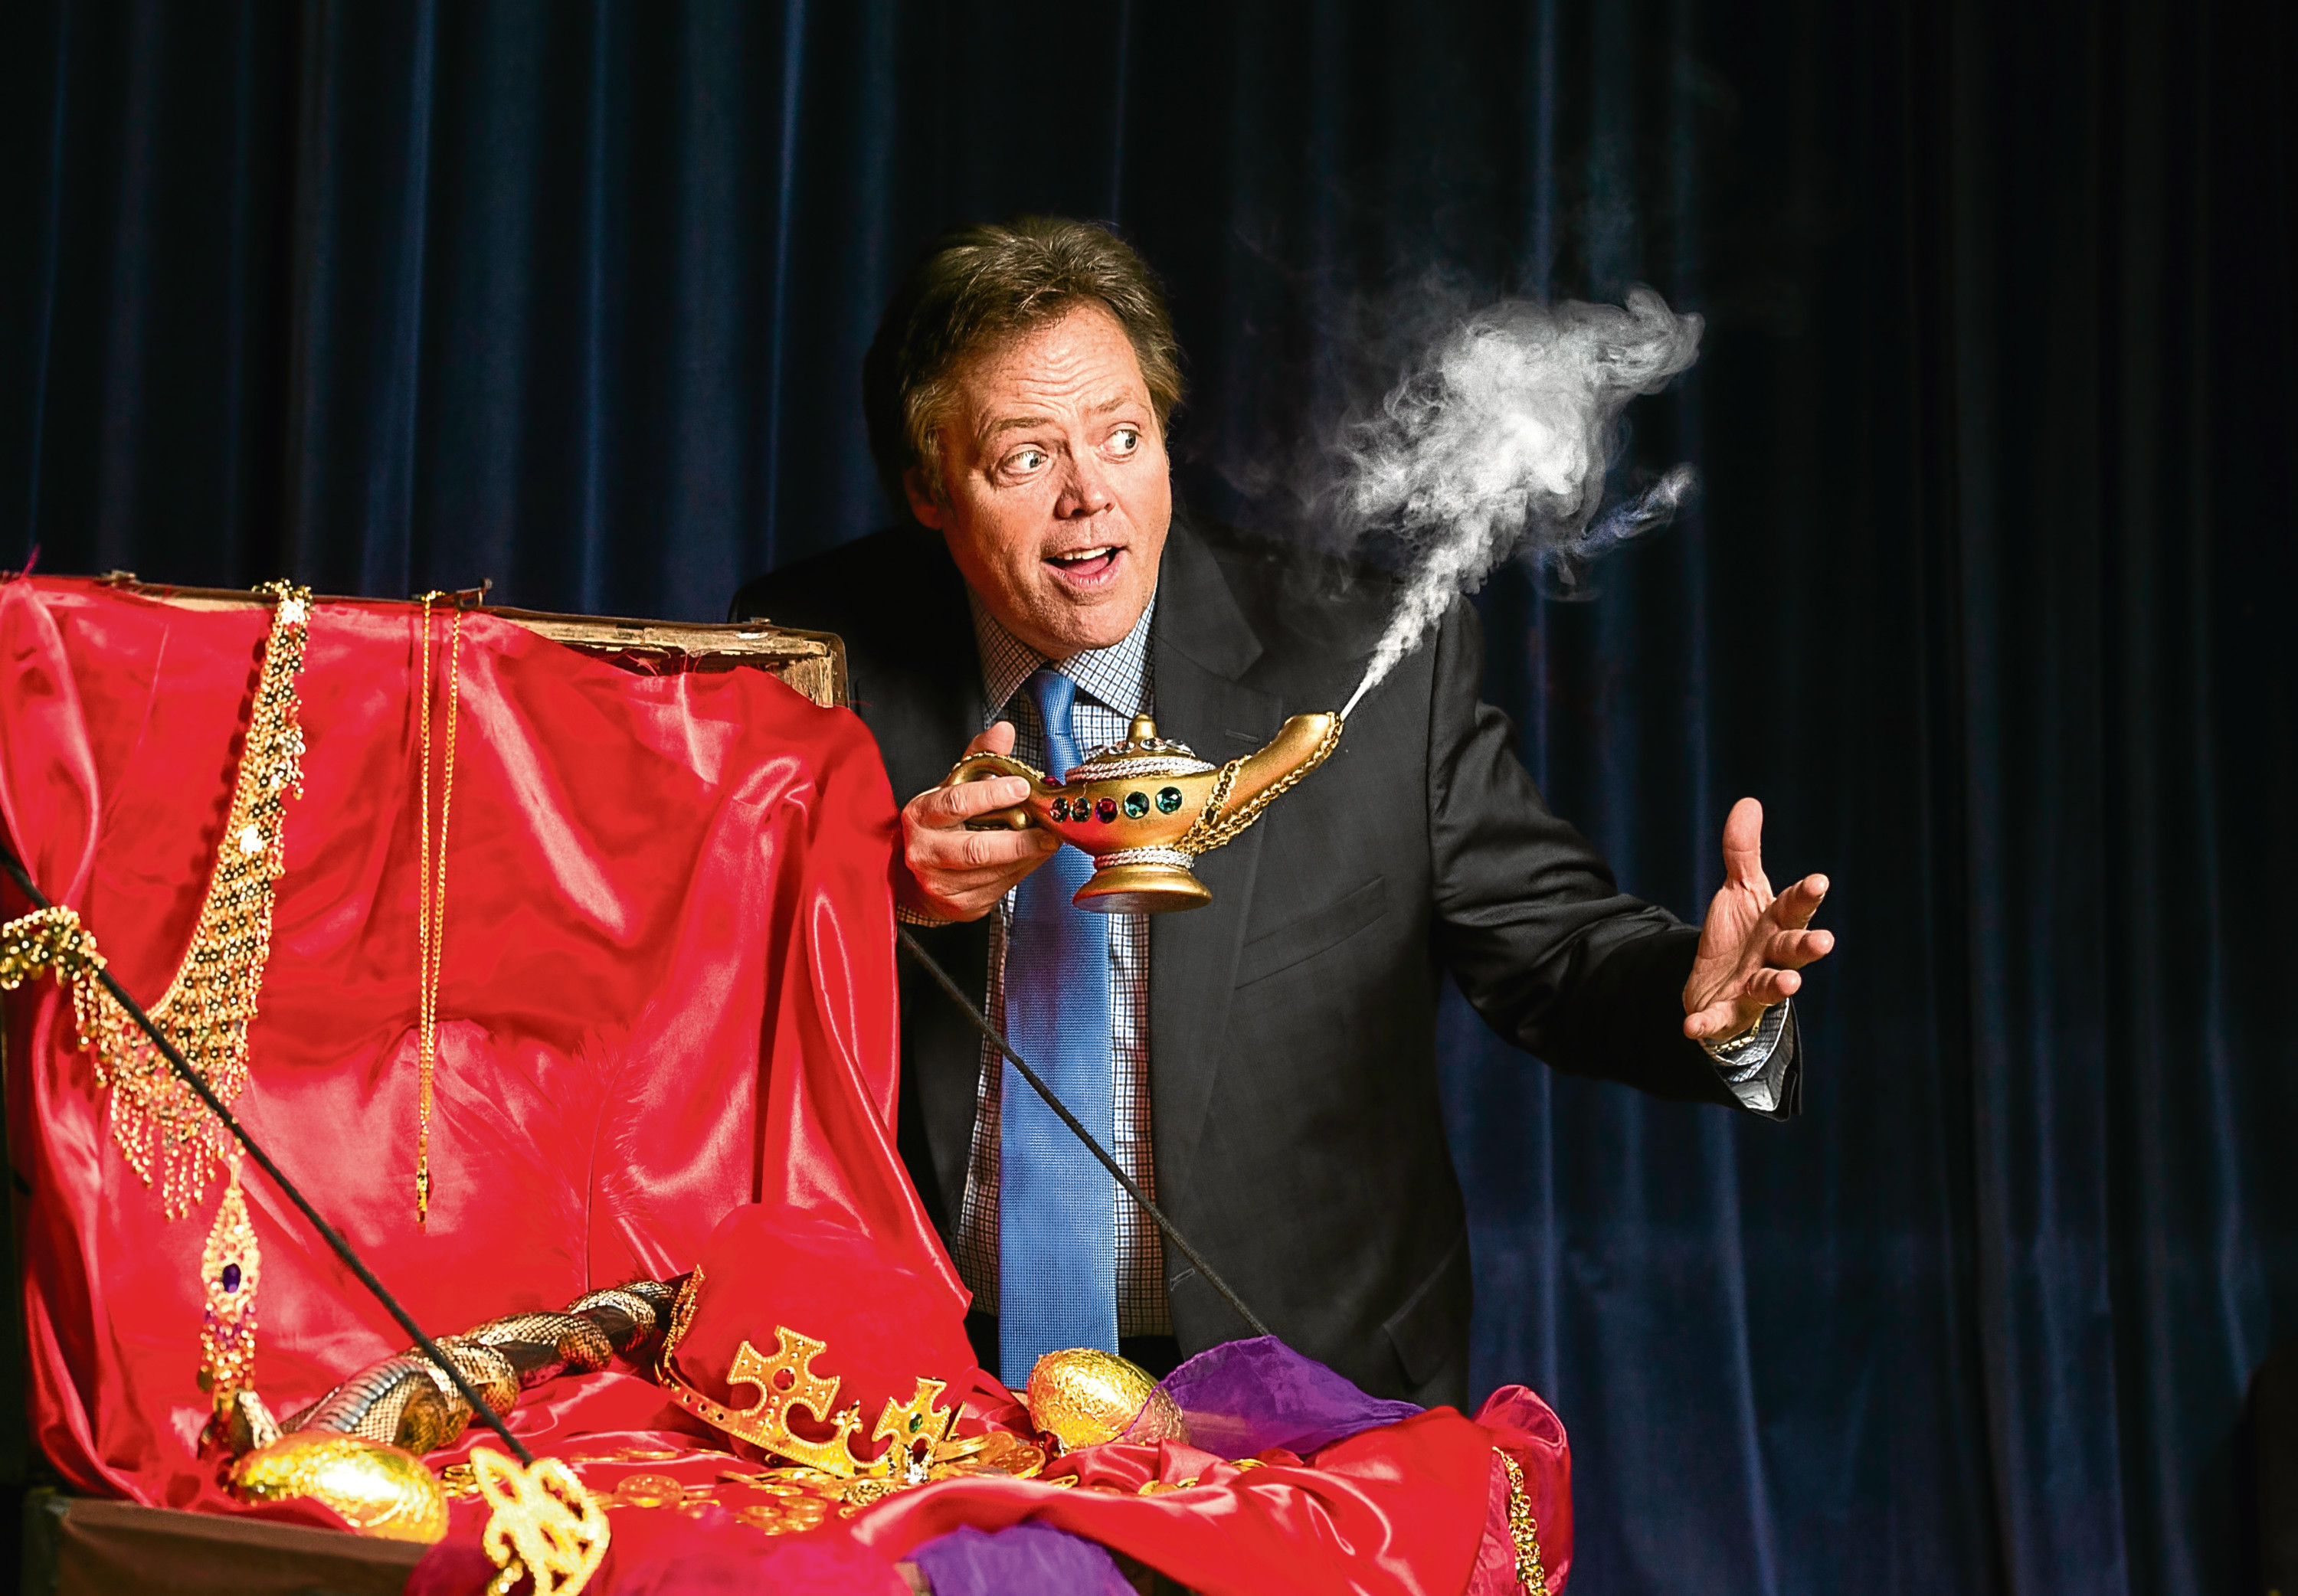 Jimmy Osmond was revealed as the new star for  this year's HMT panto Aladdin